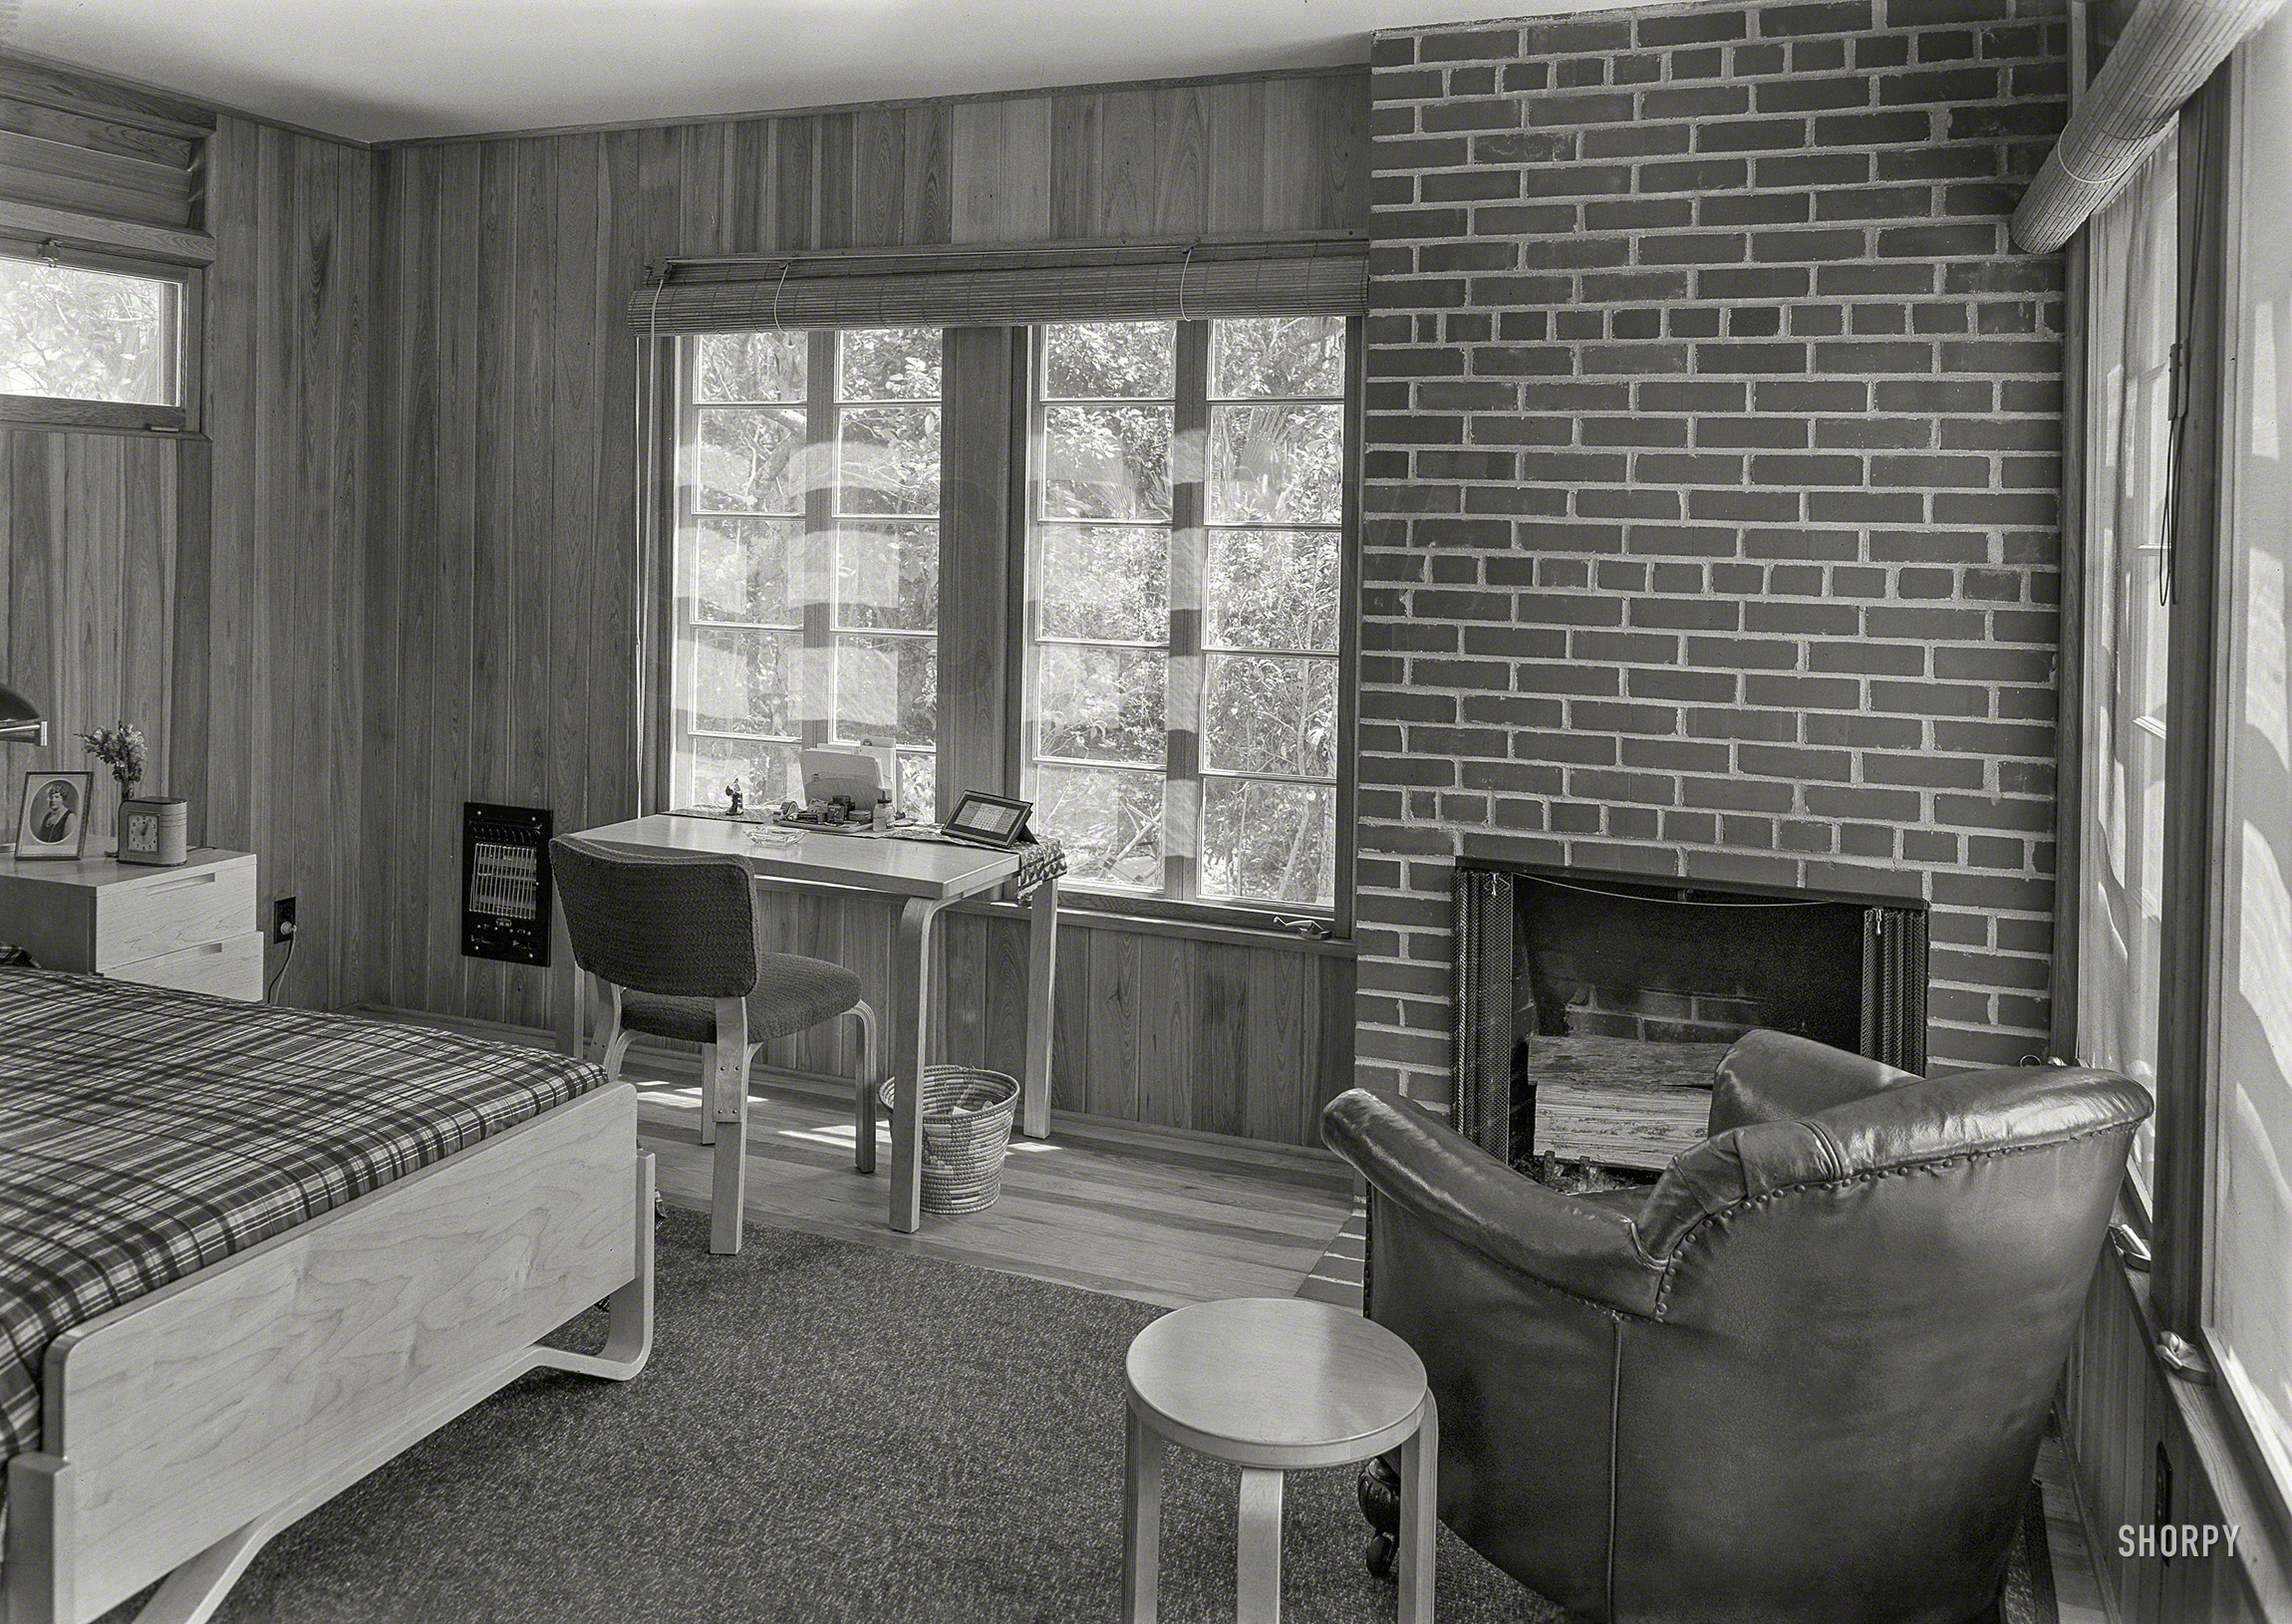 March 31, 1941. "Robert Glassford, residence in Hobe Sound, Florida. Master bedroom. Alice Morgan Carson, architect." If not quite the House of Tomorrow, at least the Bedroom of Next Wednesday. 5x7 acetate negative. View full size.